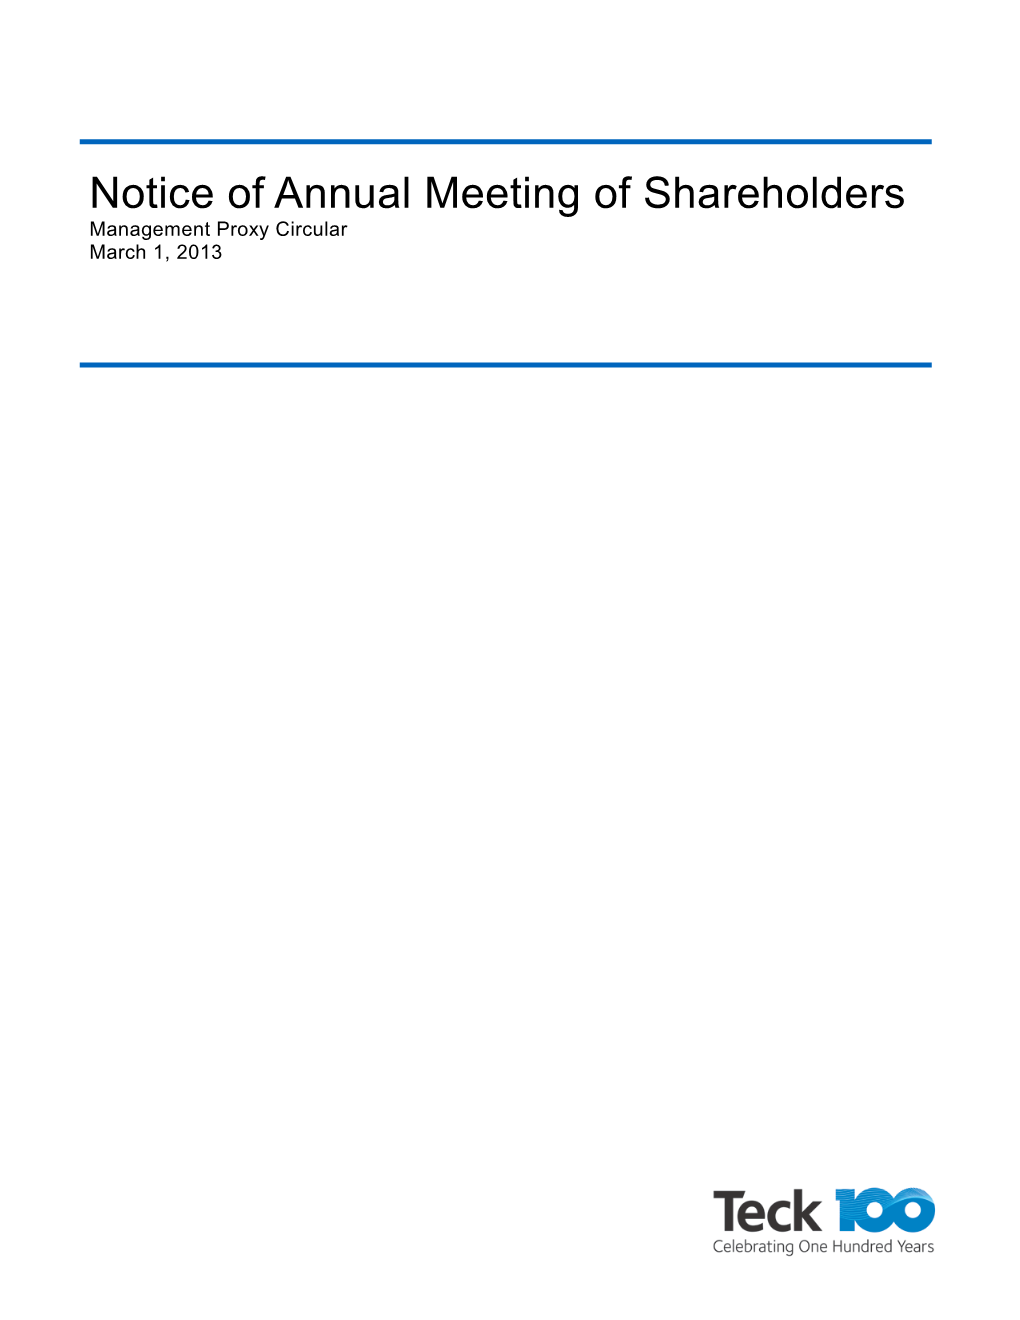 Notice of Annual Meeting of Shareholders Management Proxy Circular